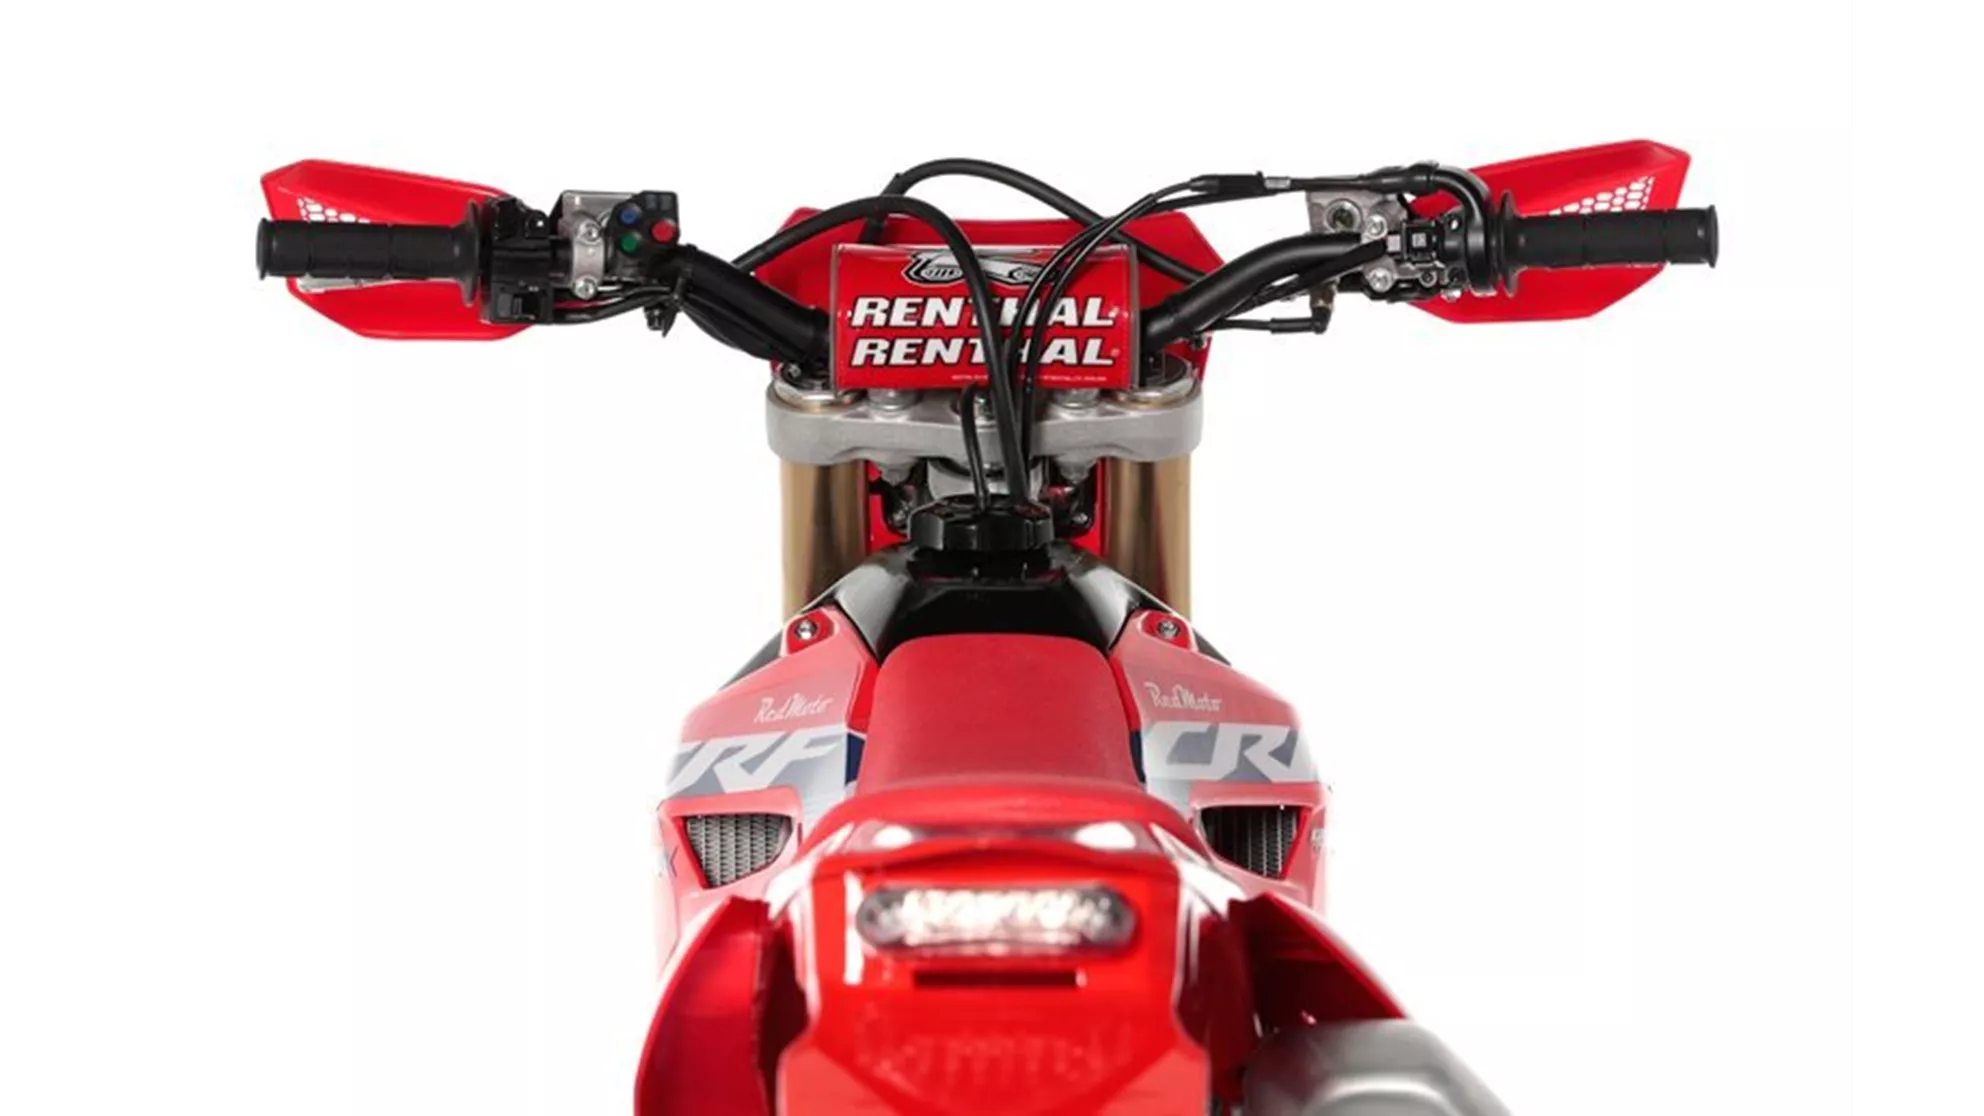 Red Moto CRF 450RX Enduro Special - Image 21